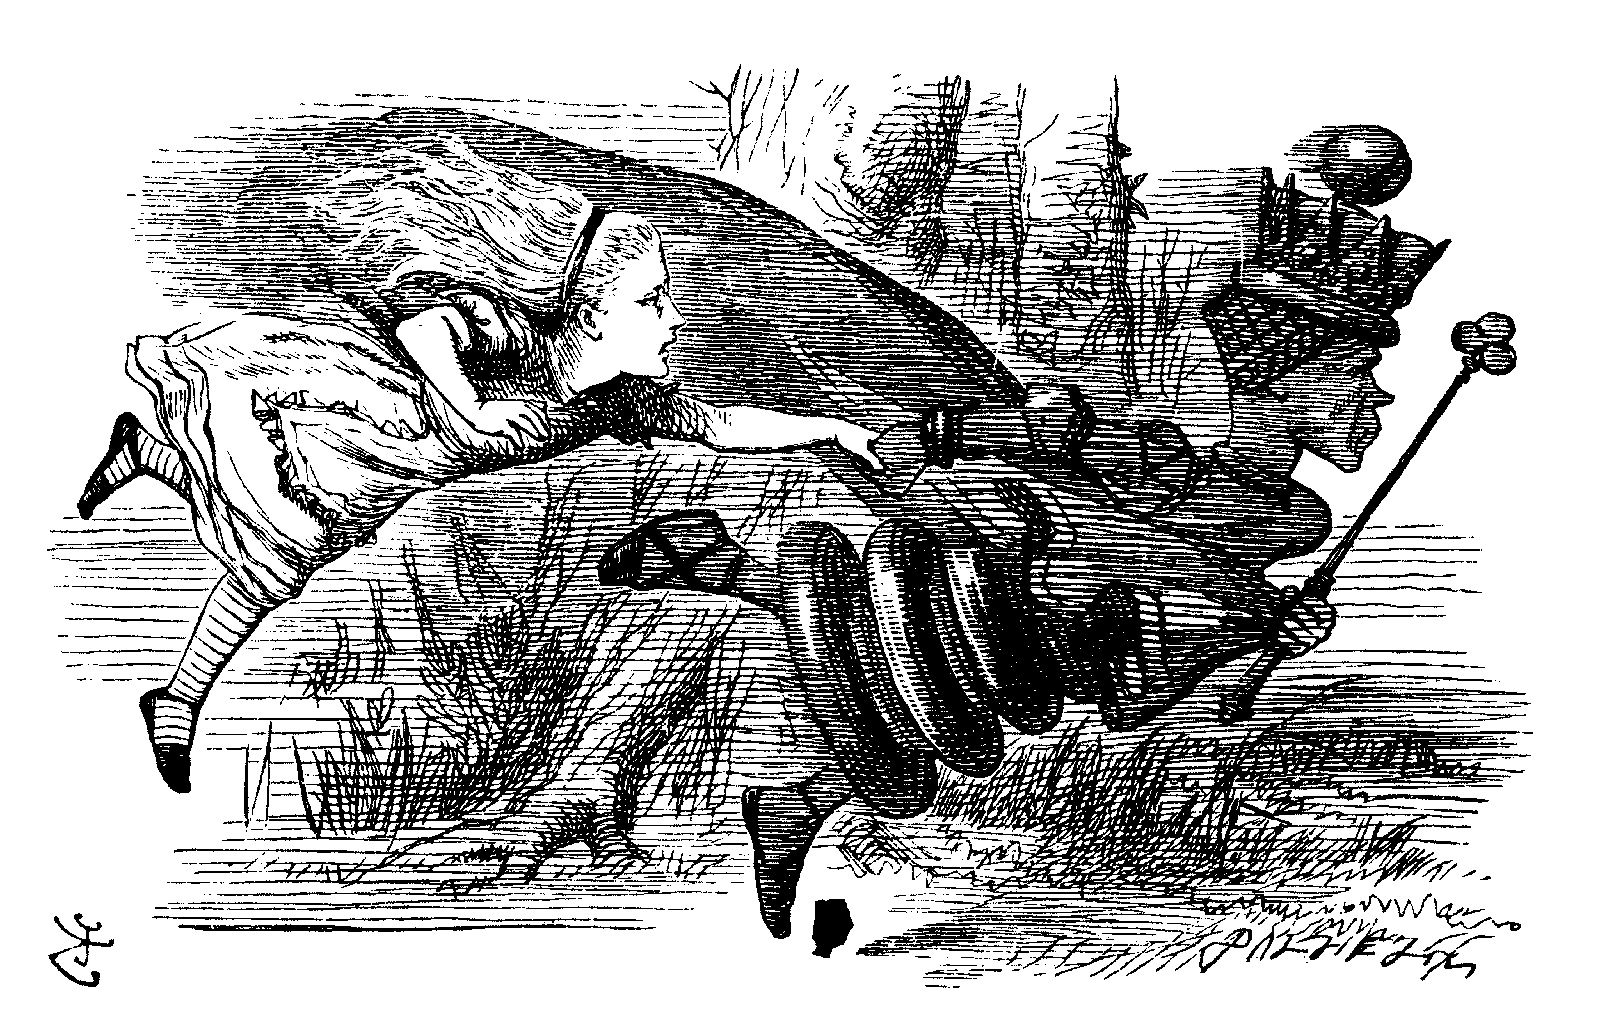 Alice and the Red Queen; illustration by John Tenniel from Lewis Carroll’s Through the Looking-Glass, 1872